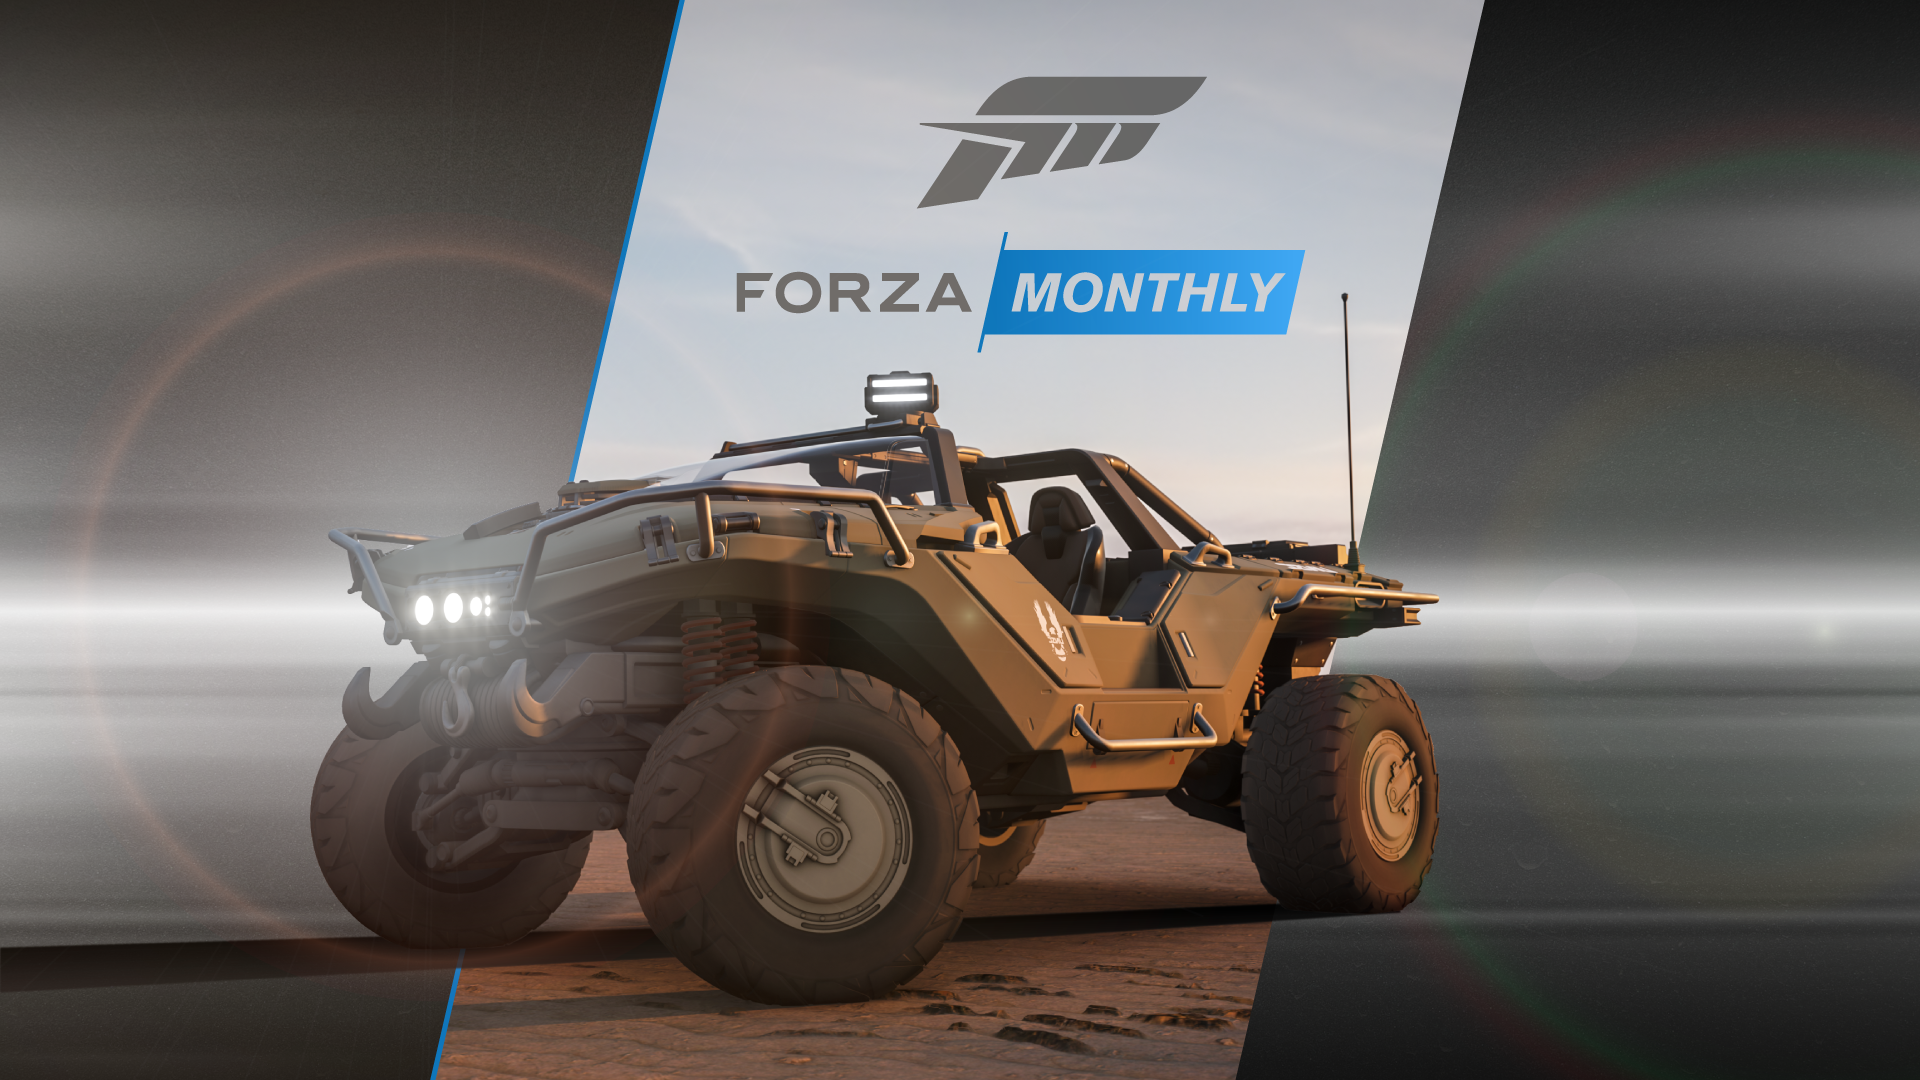 Forza Monthly Halo